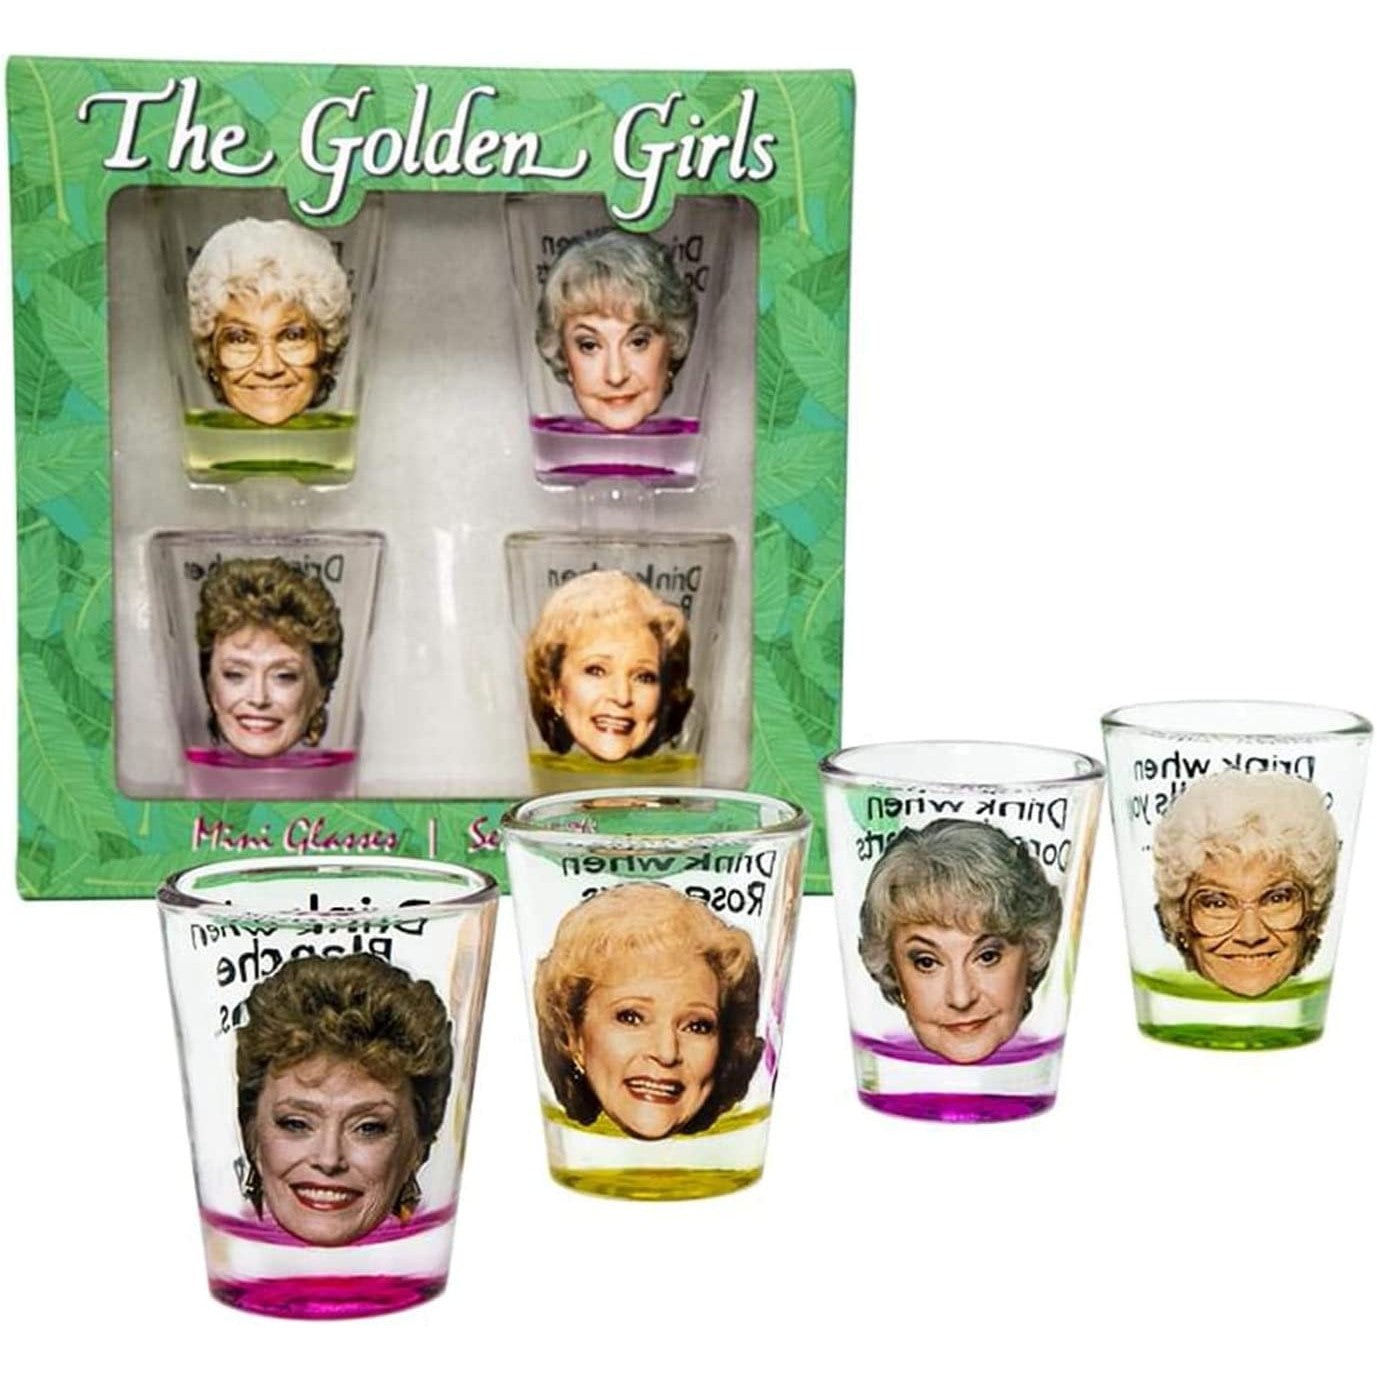 A set of four Golden Girls shot glasses as well as a set of the glasses in green packaging.